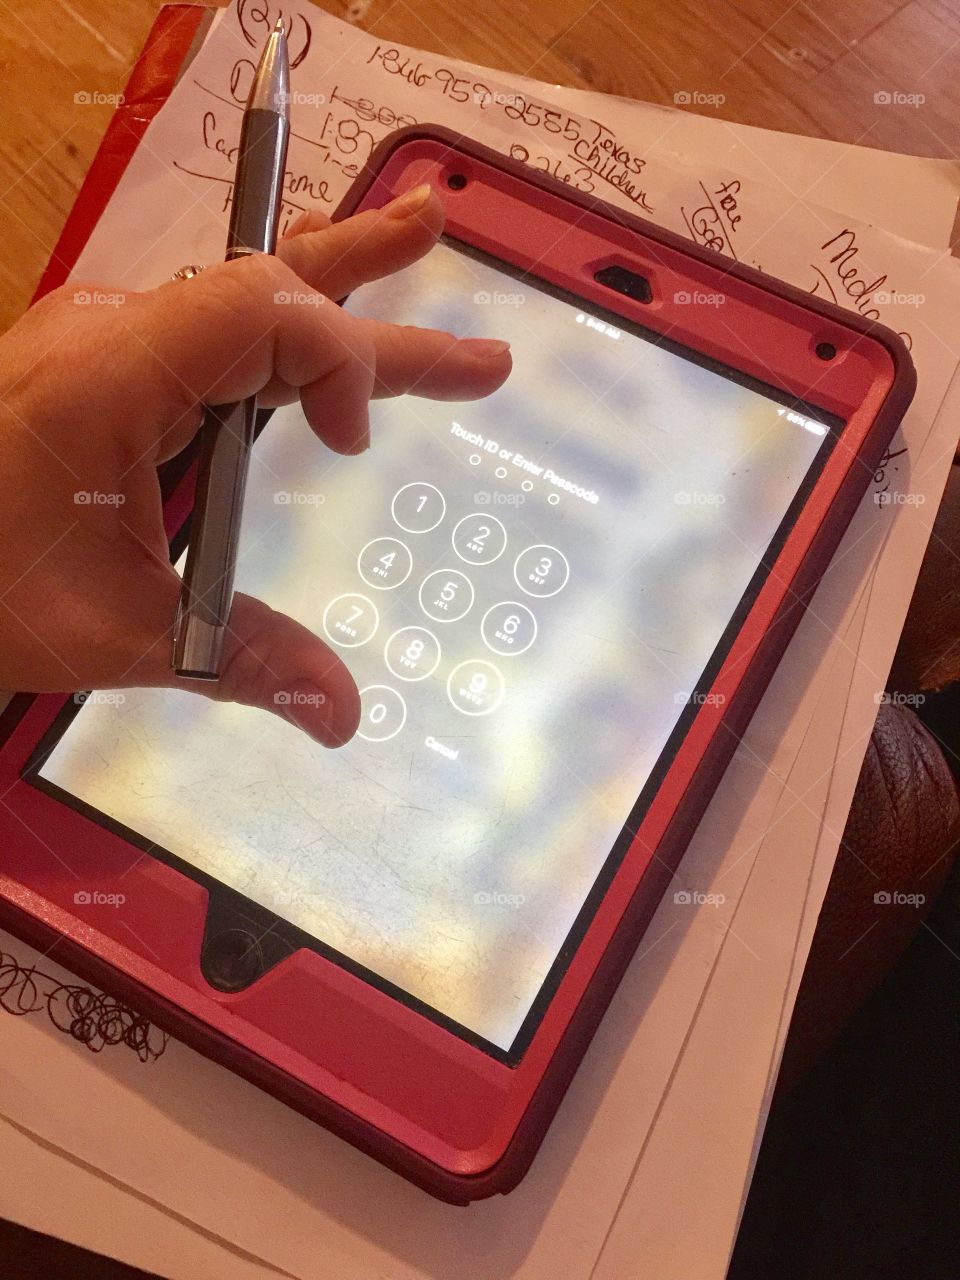 My pink iPad on the password screen with my hand and a pen